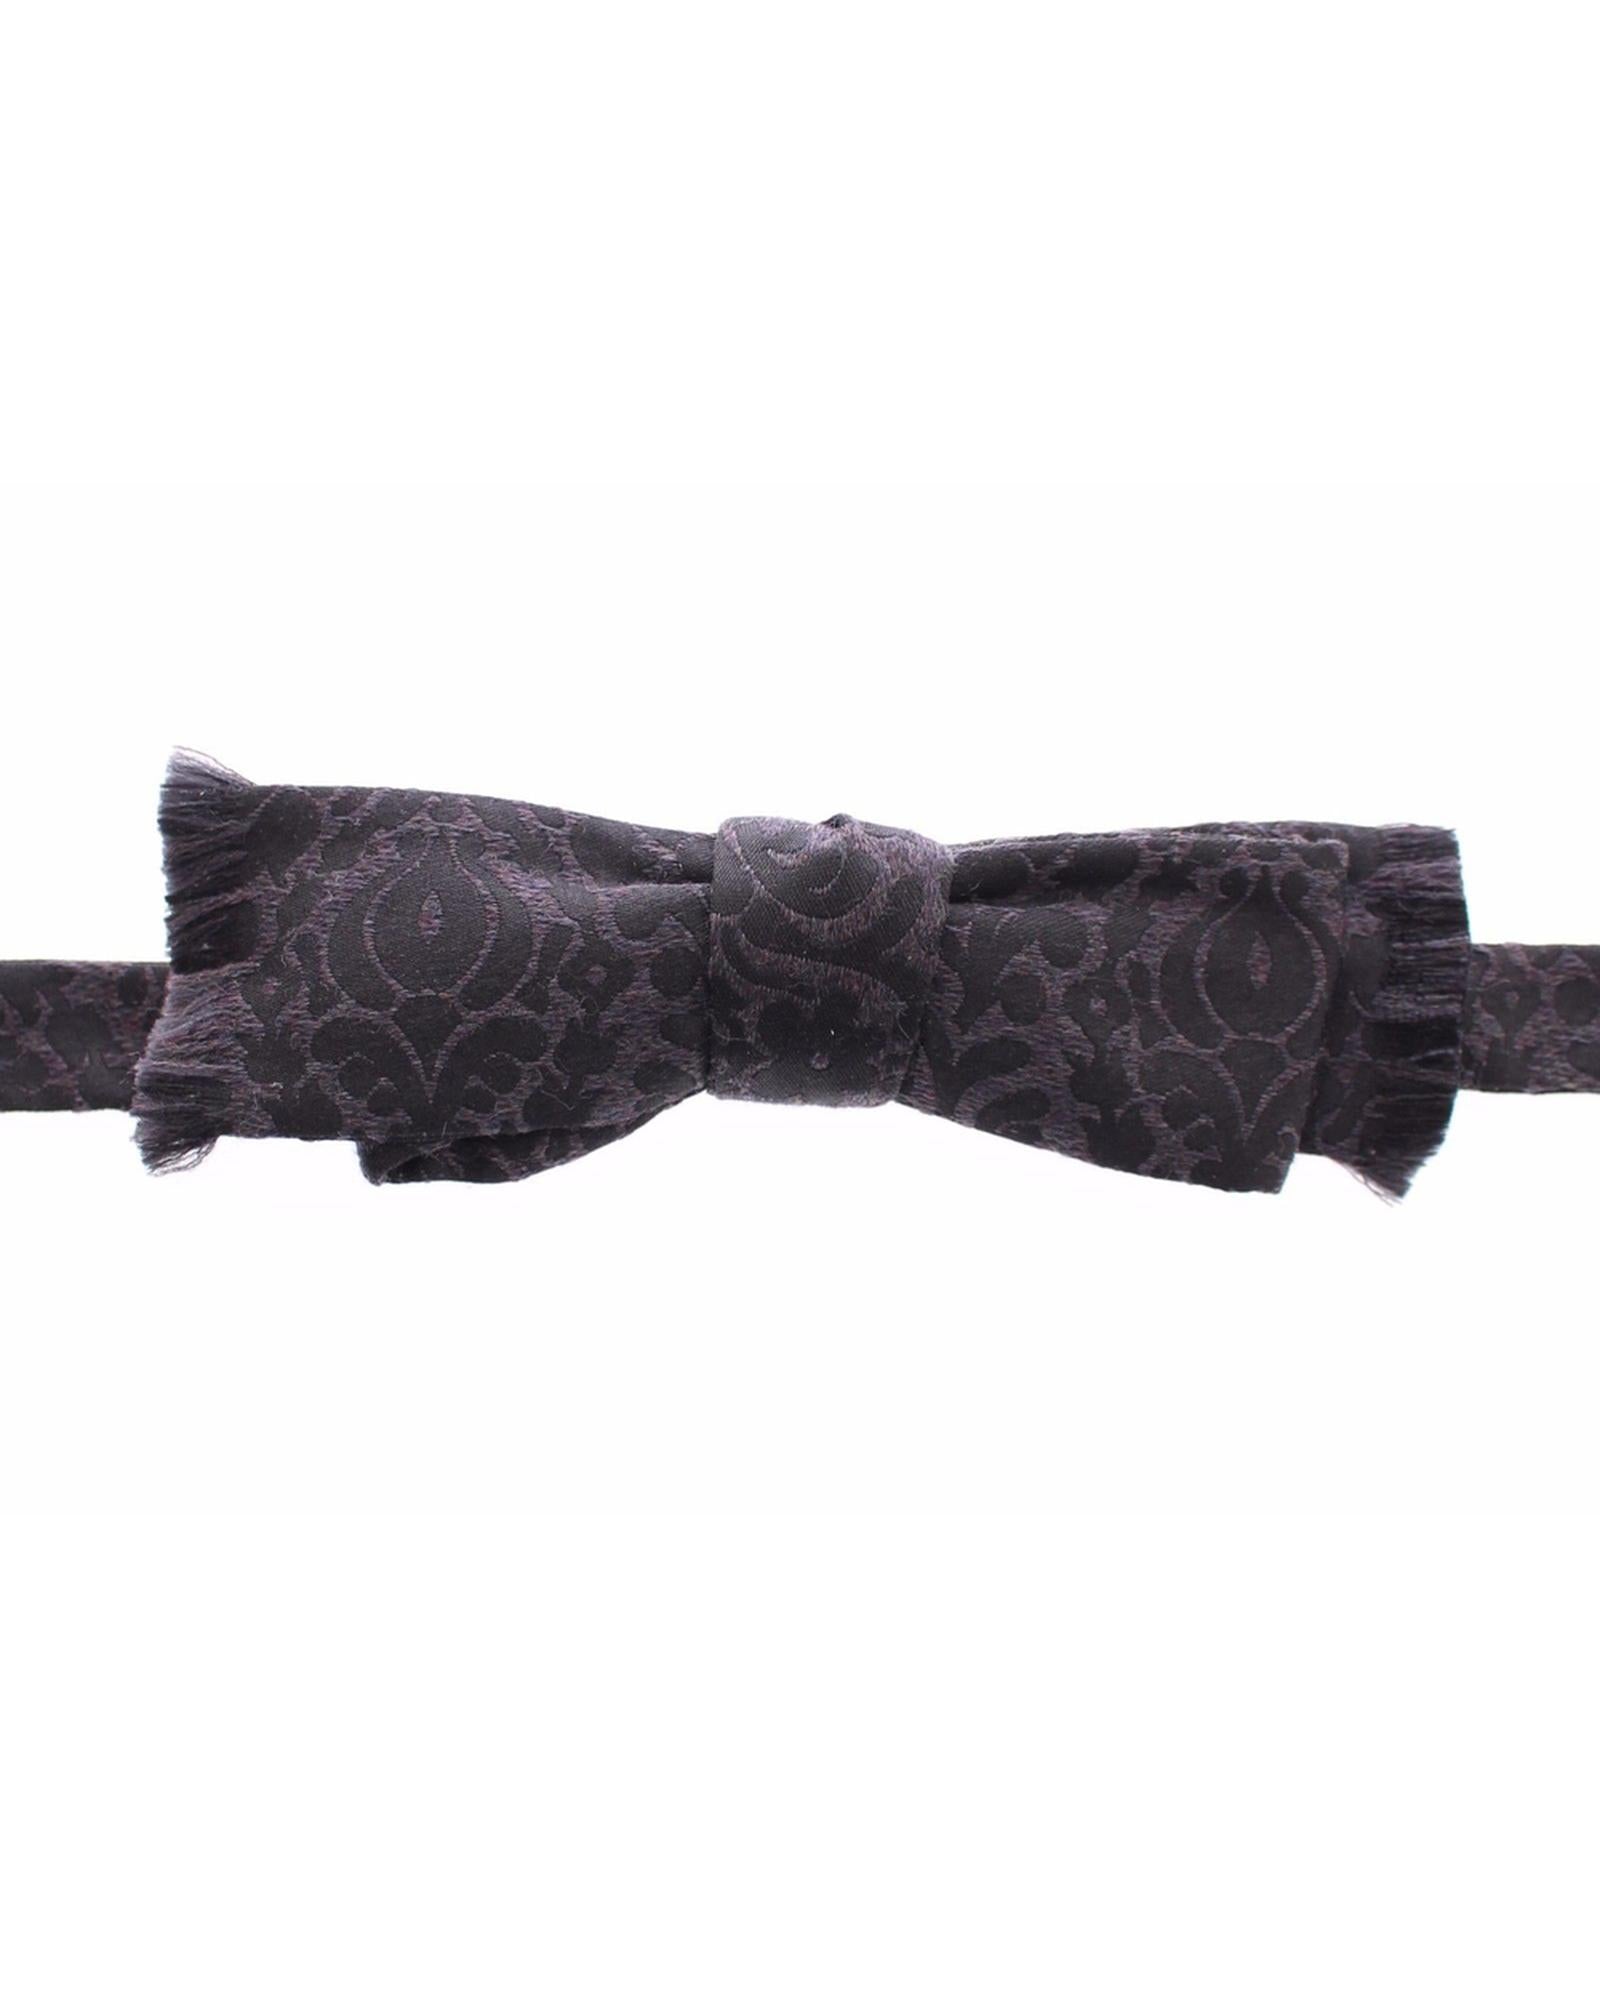 Exclusive Dolce & Gabbana Bow Tie with Paisley Pattern One Size Men